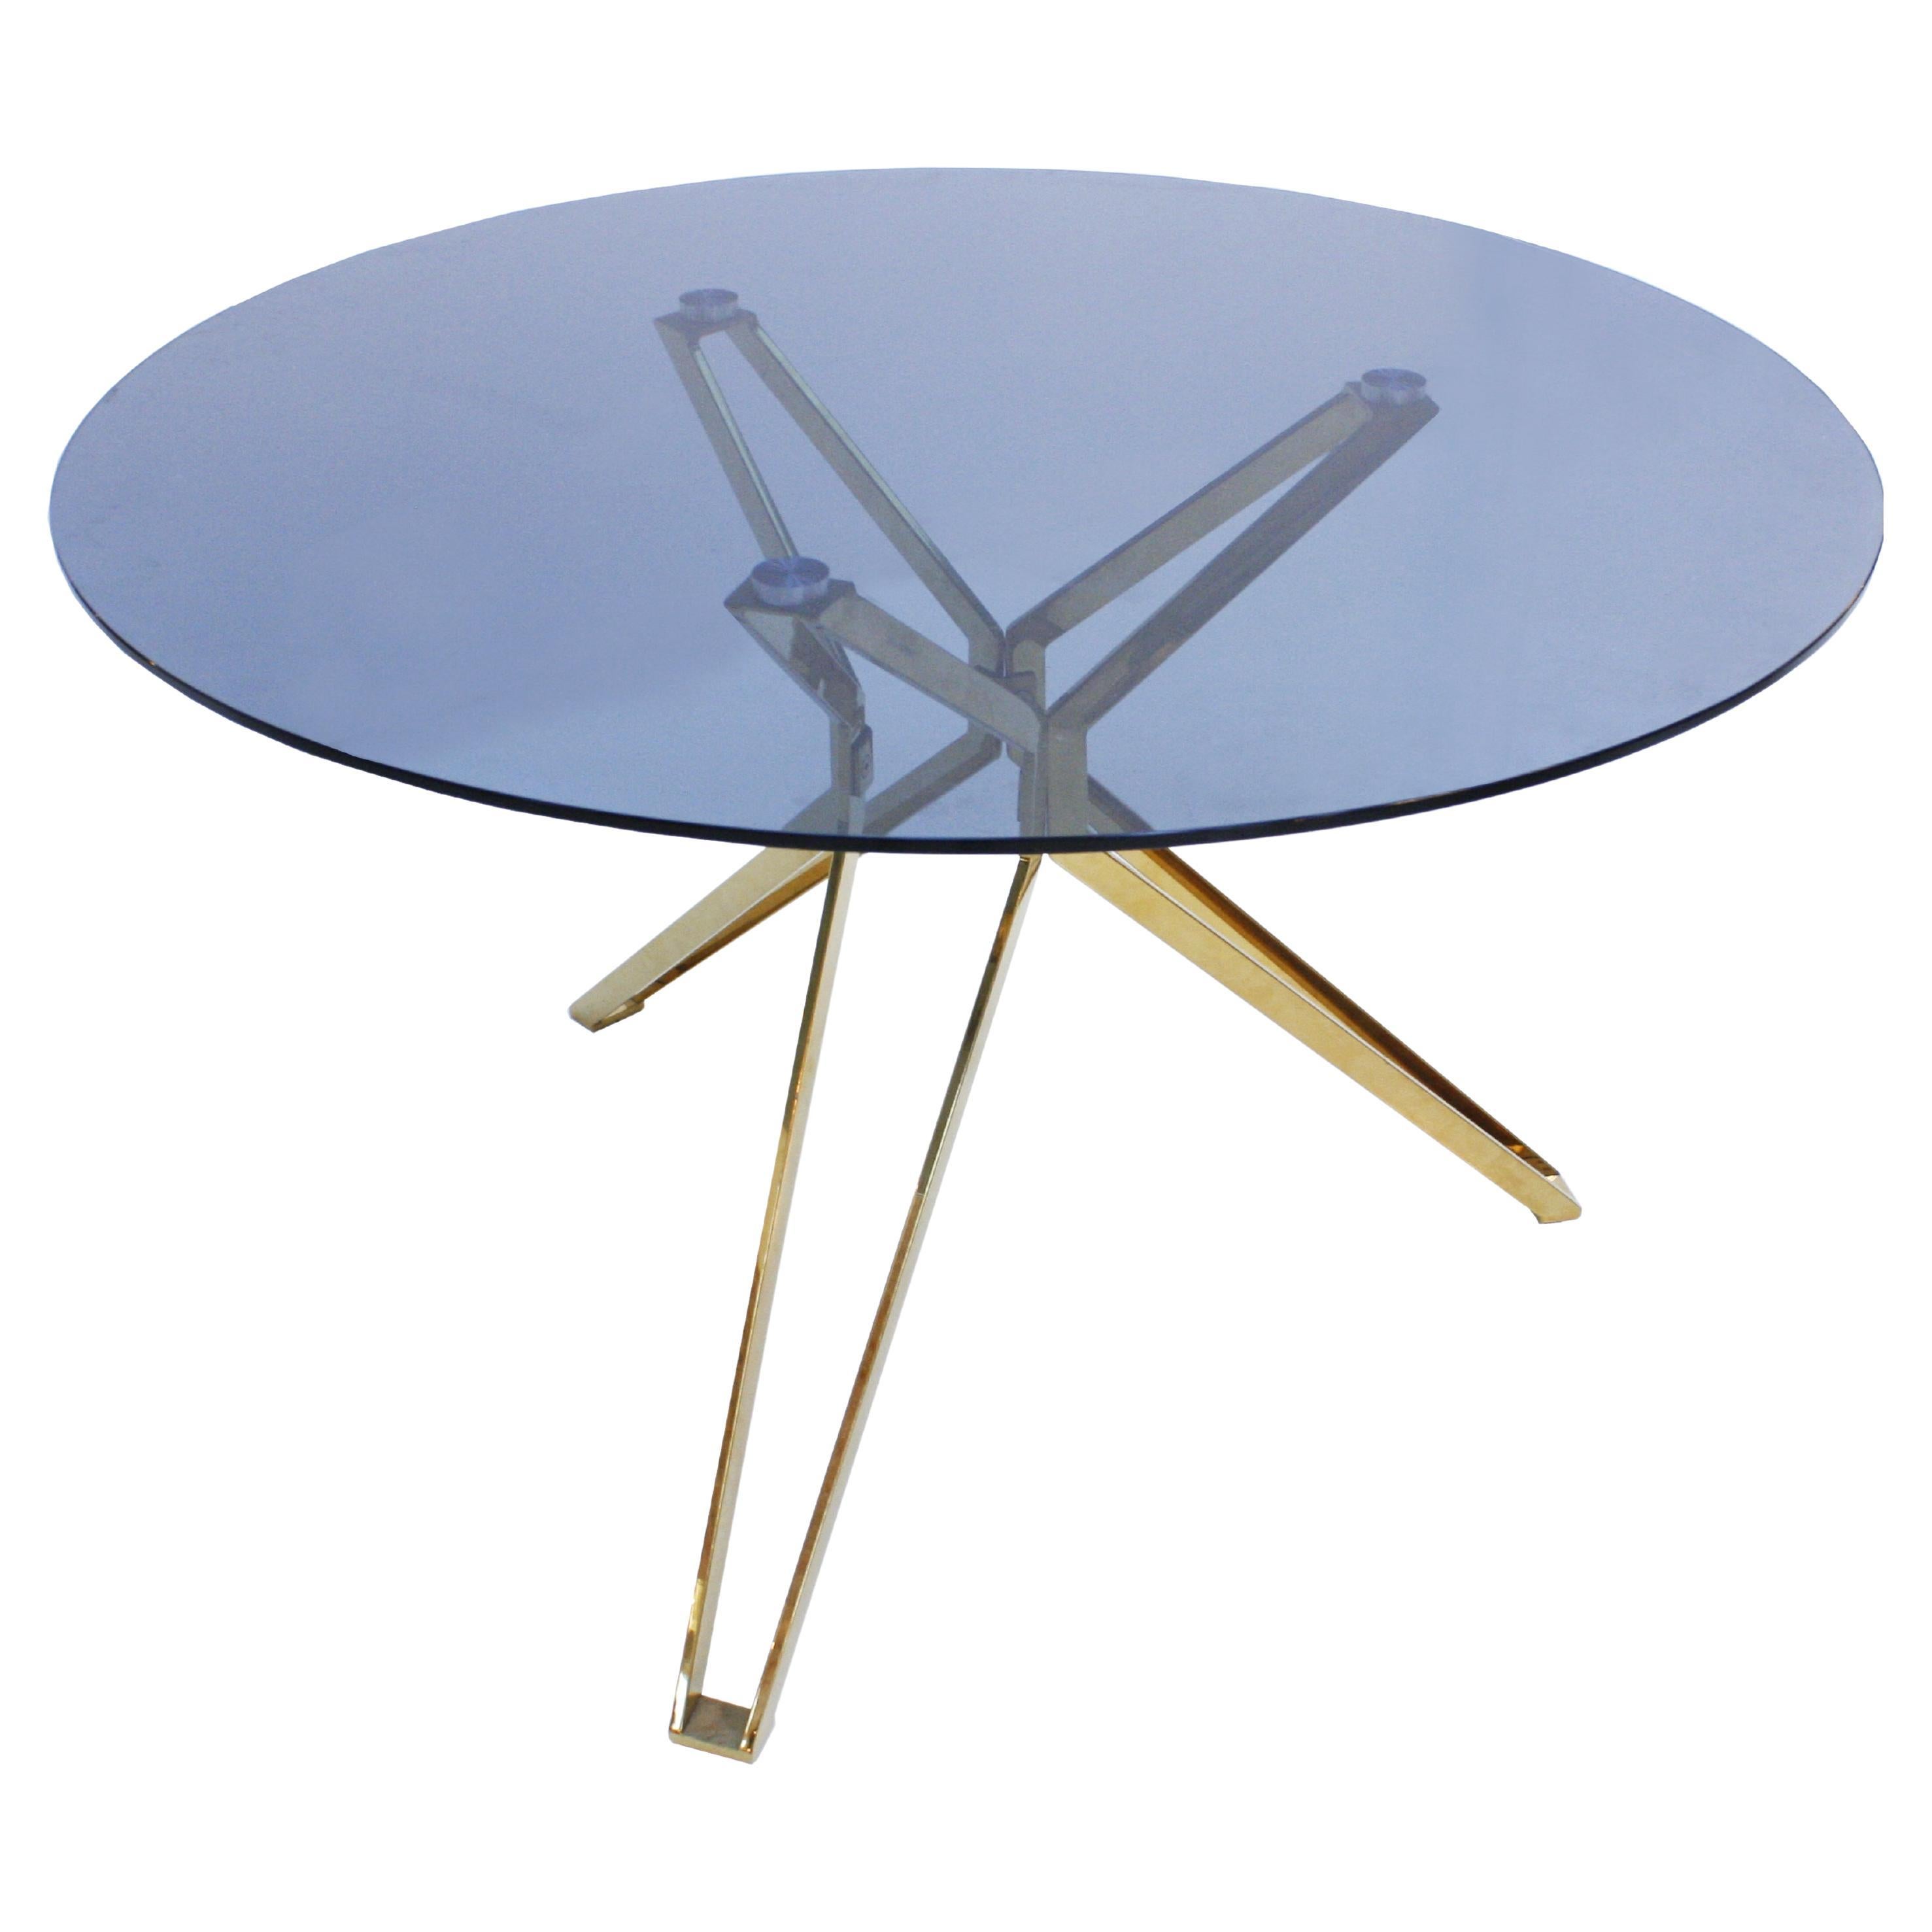 Contemporary Round Smoked Glass and Brass Sculptural Dining Table, Frankreich im Angebot